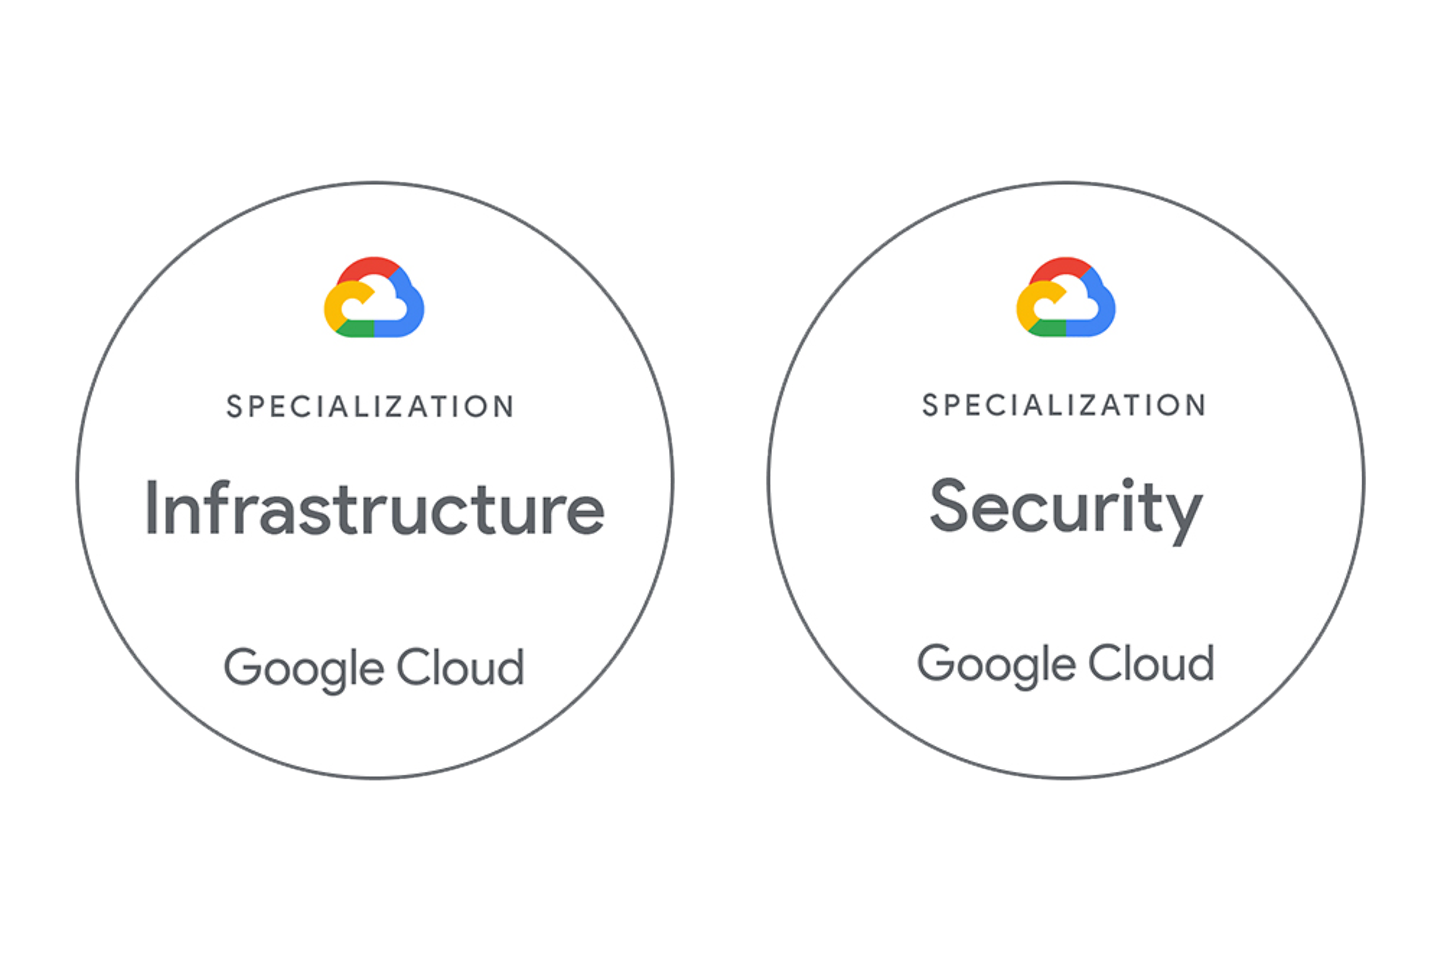 Google Cloud Specialization Badges for Infrastructure and Security